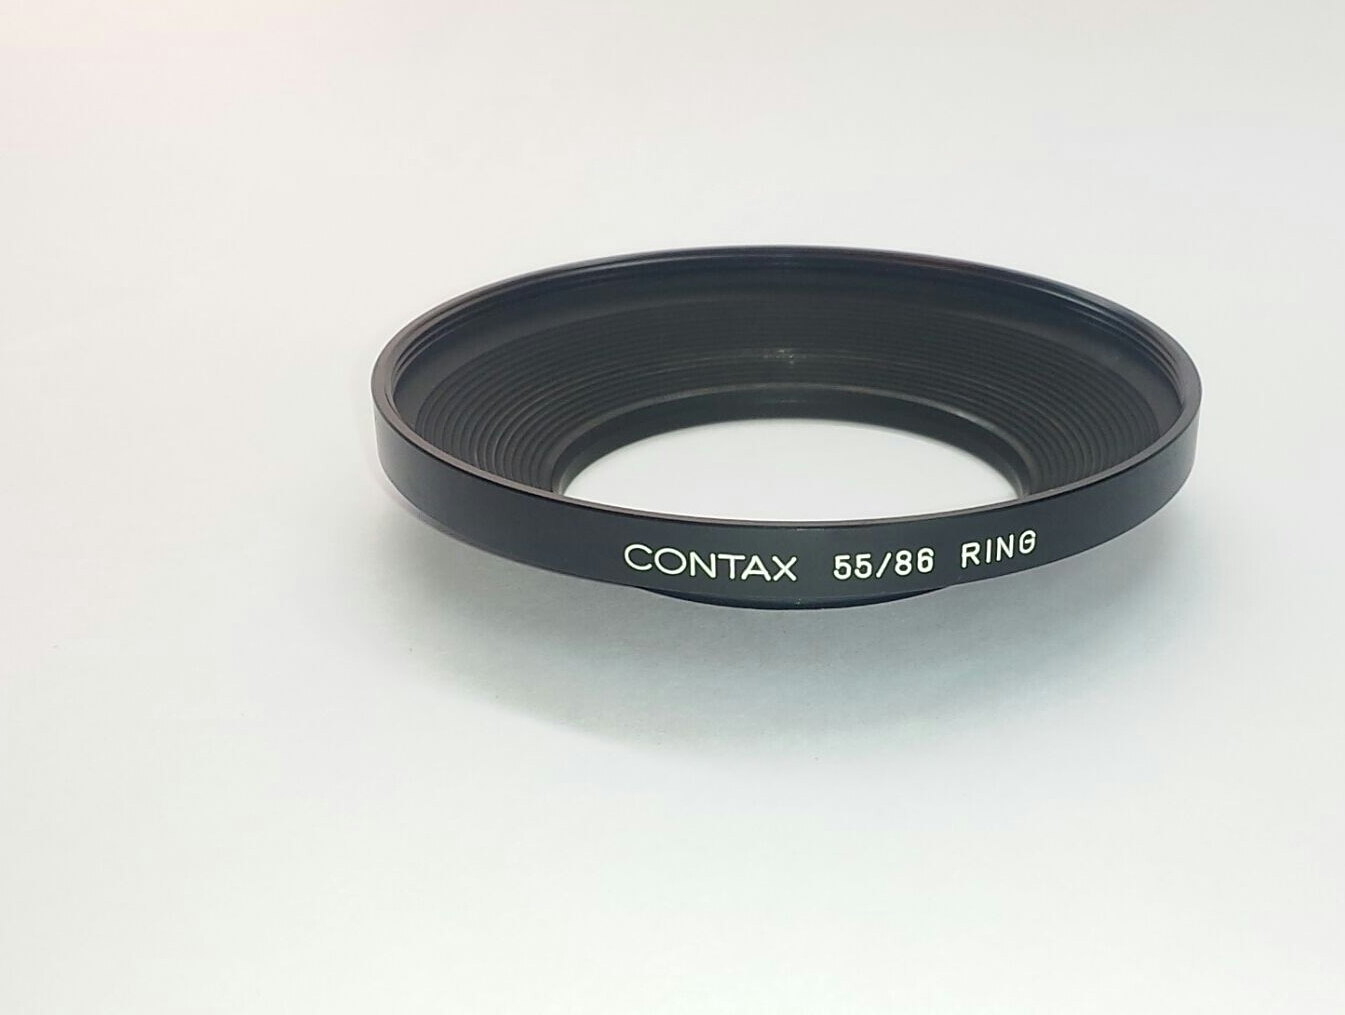 Contax 55/86 Ring